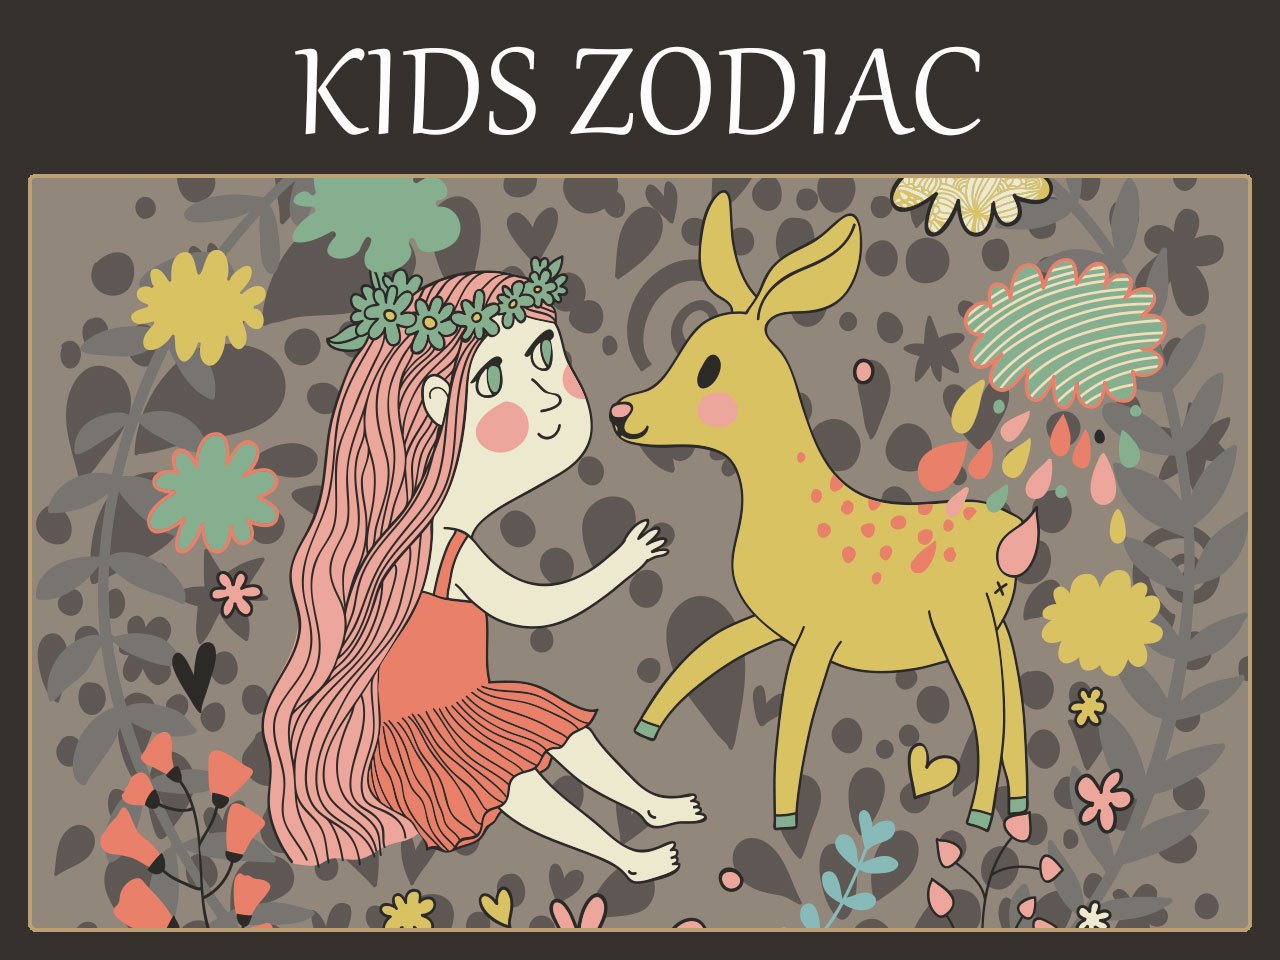 Dreams Of Kids According To Zodiac Signs